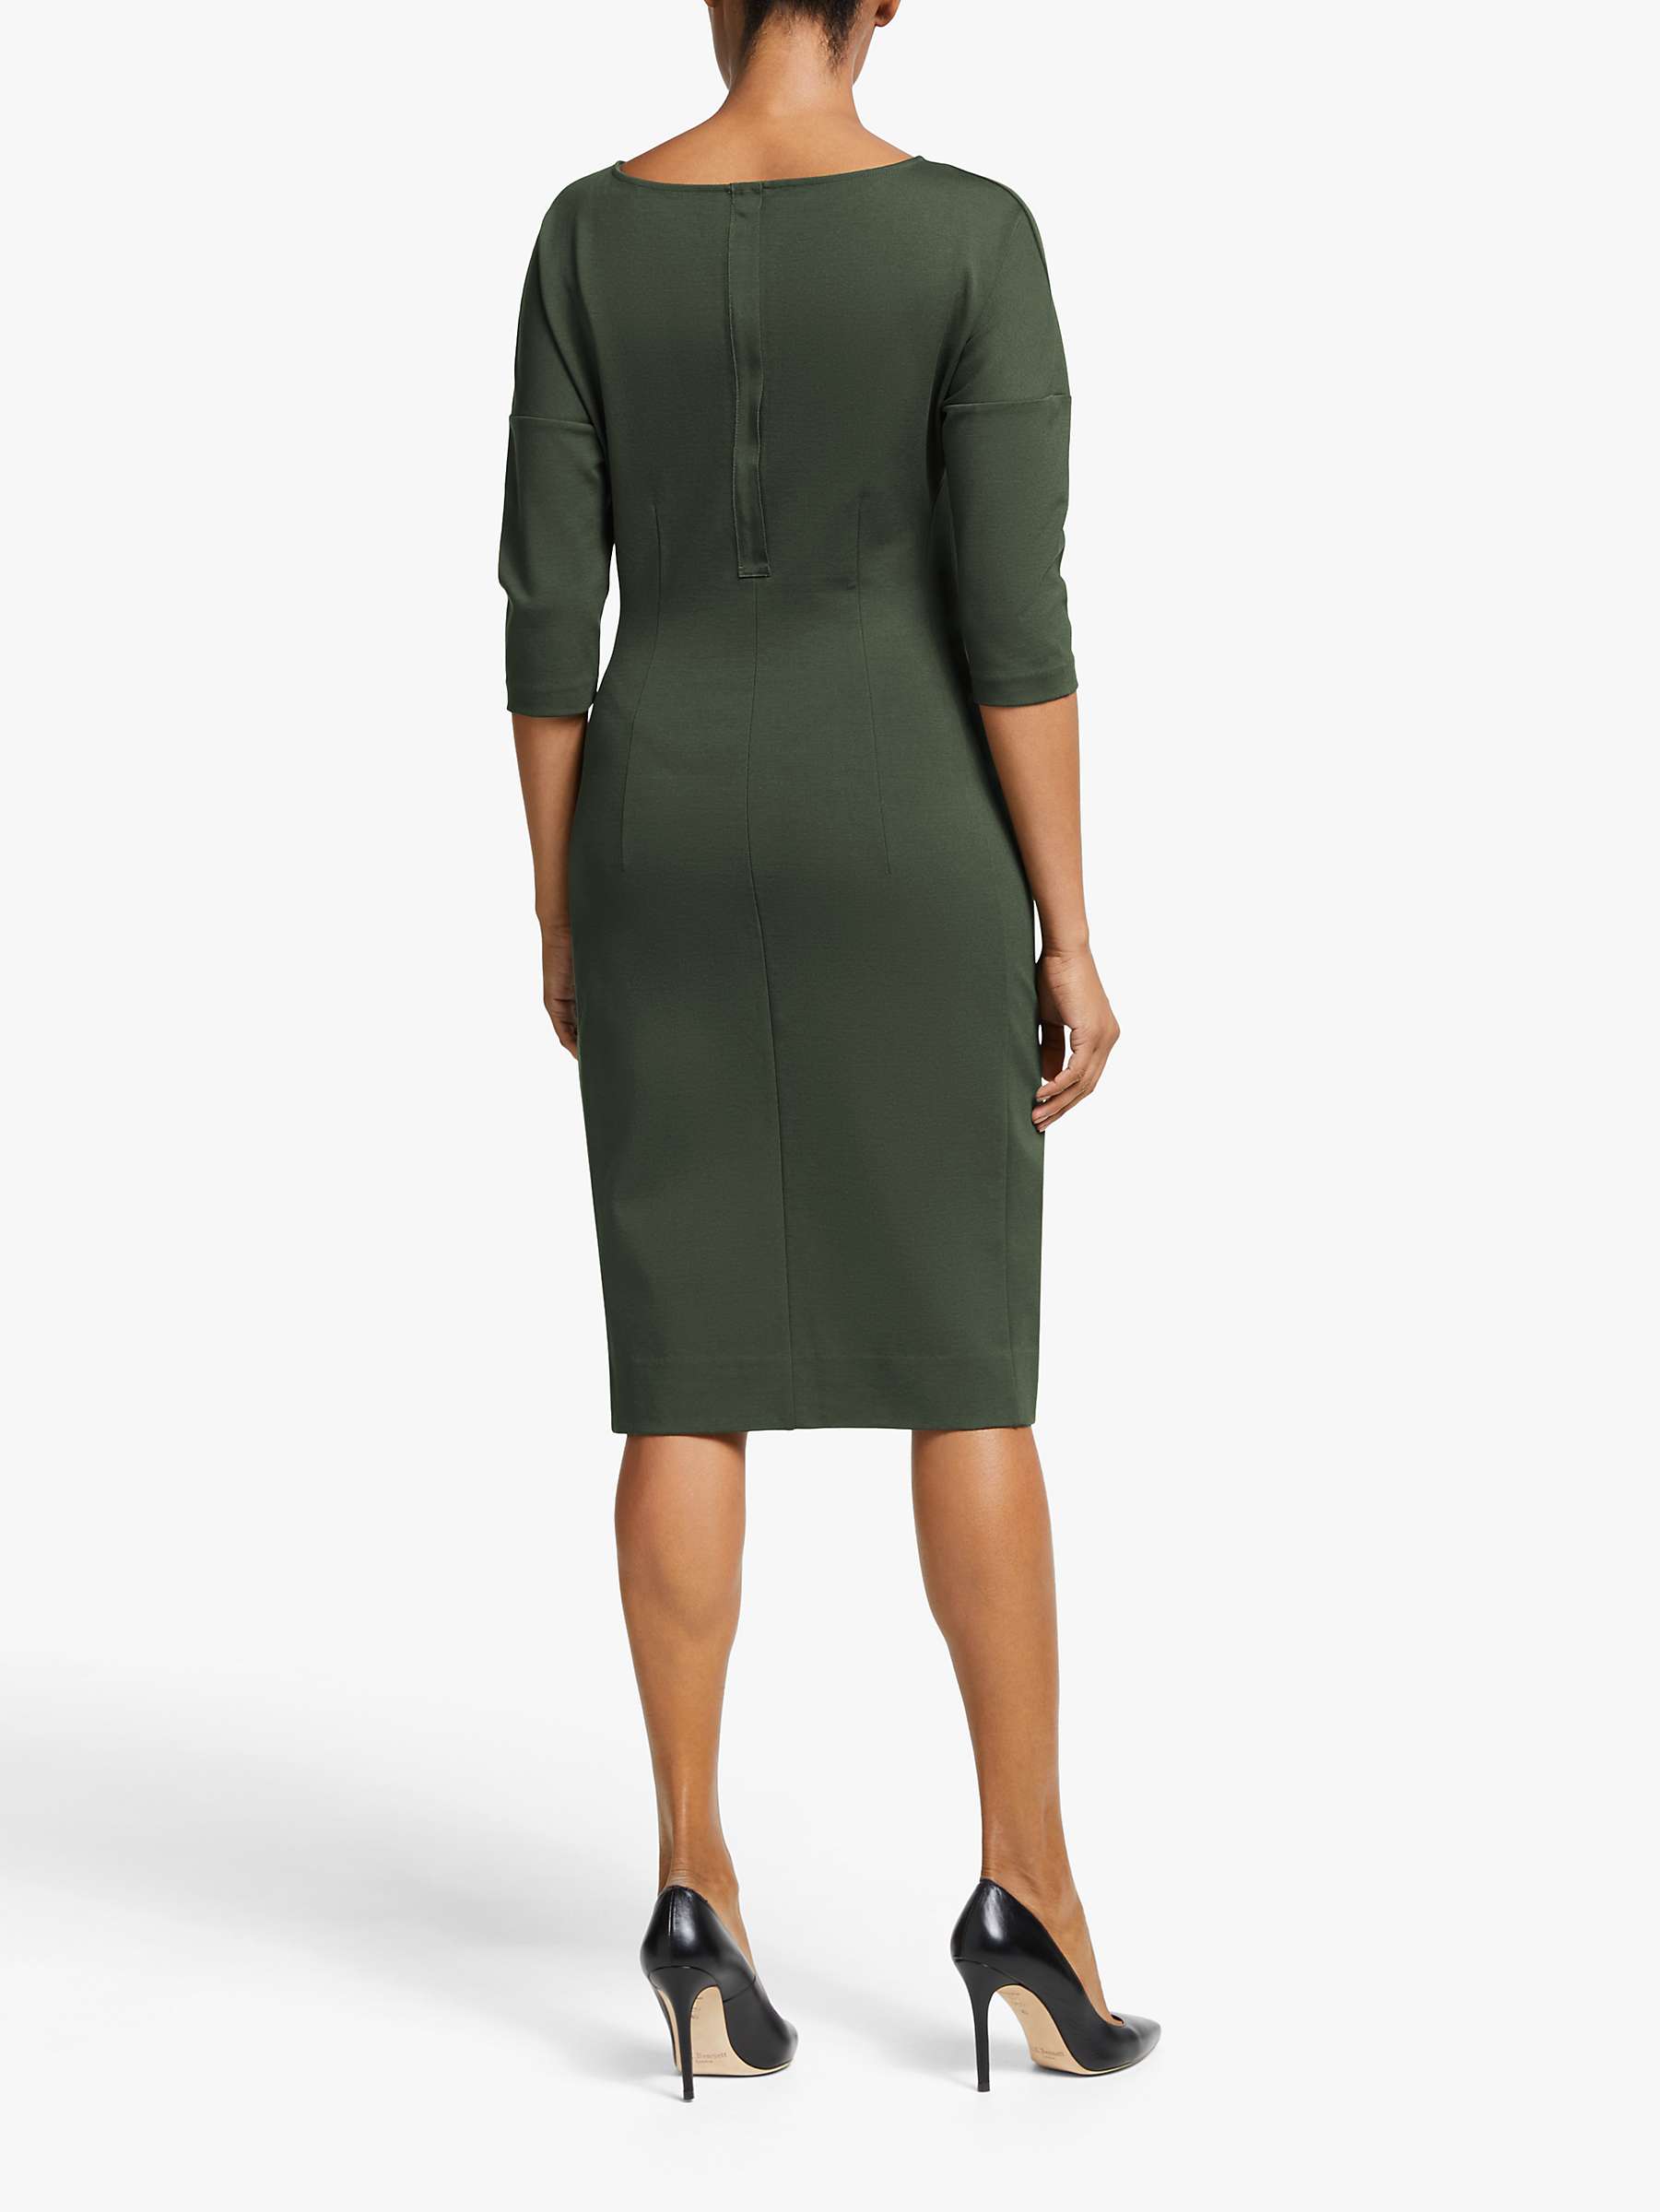 Winser London Grace Miracle Dress in Dark Khaki Green Womens Clothing Dresses Casual and day dresses 